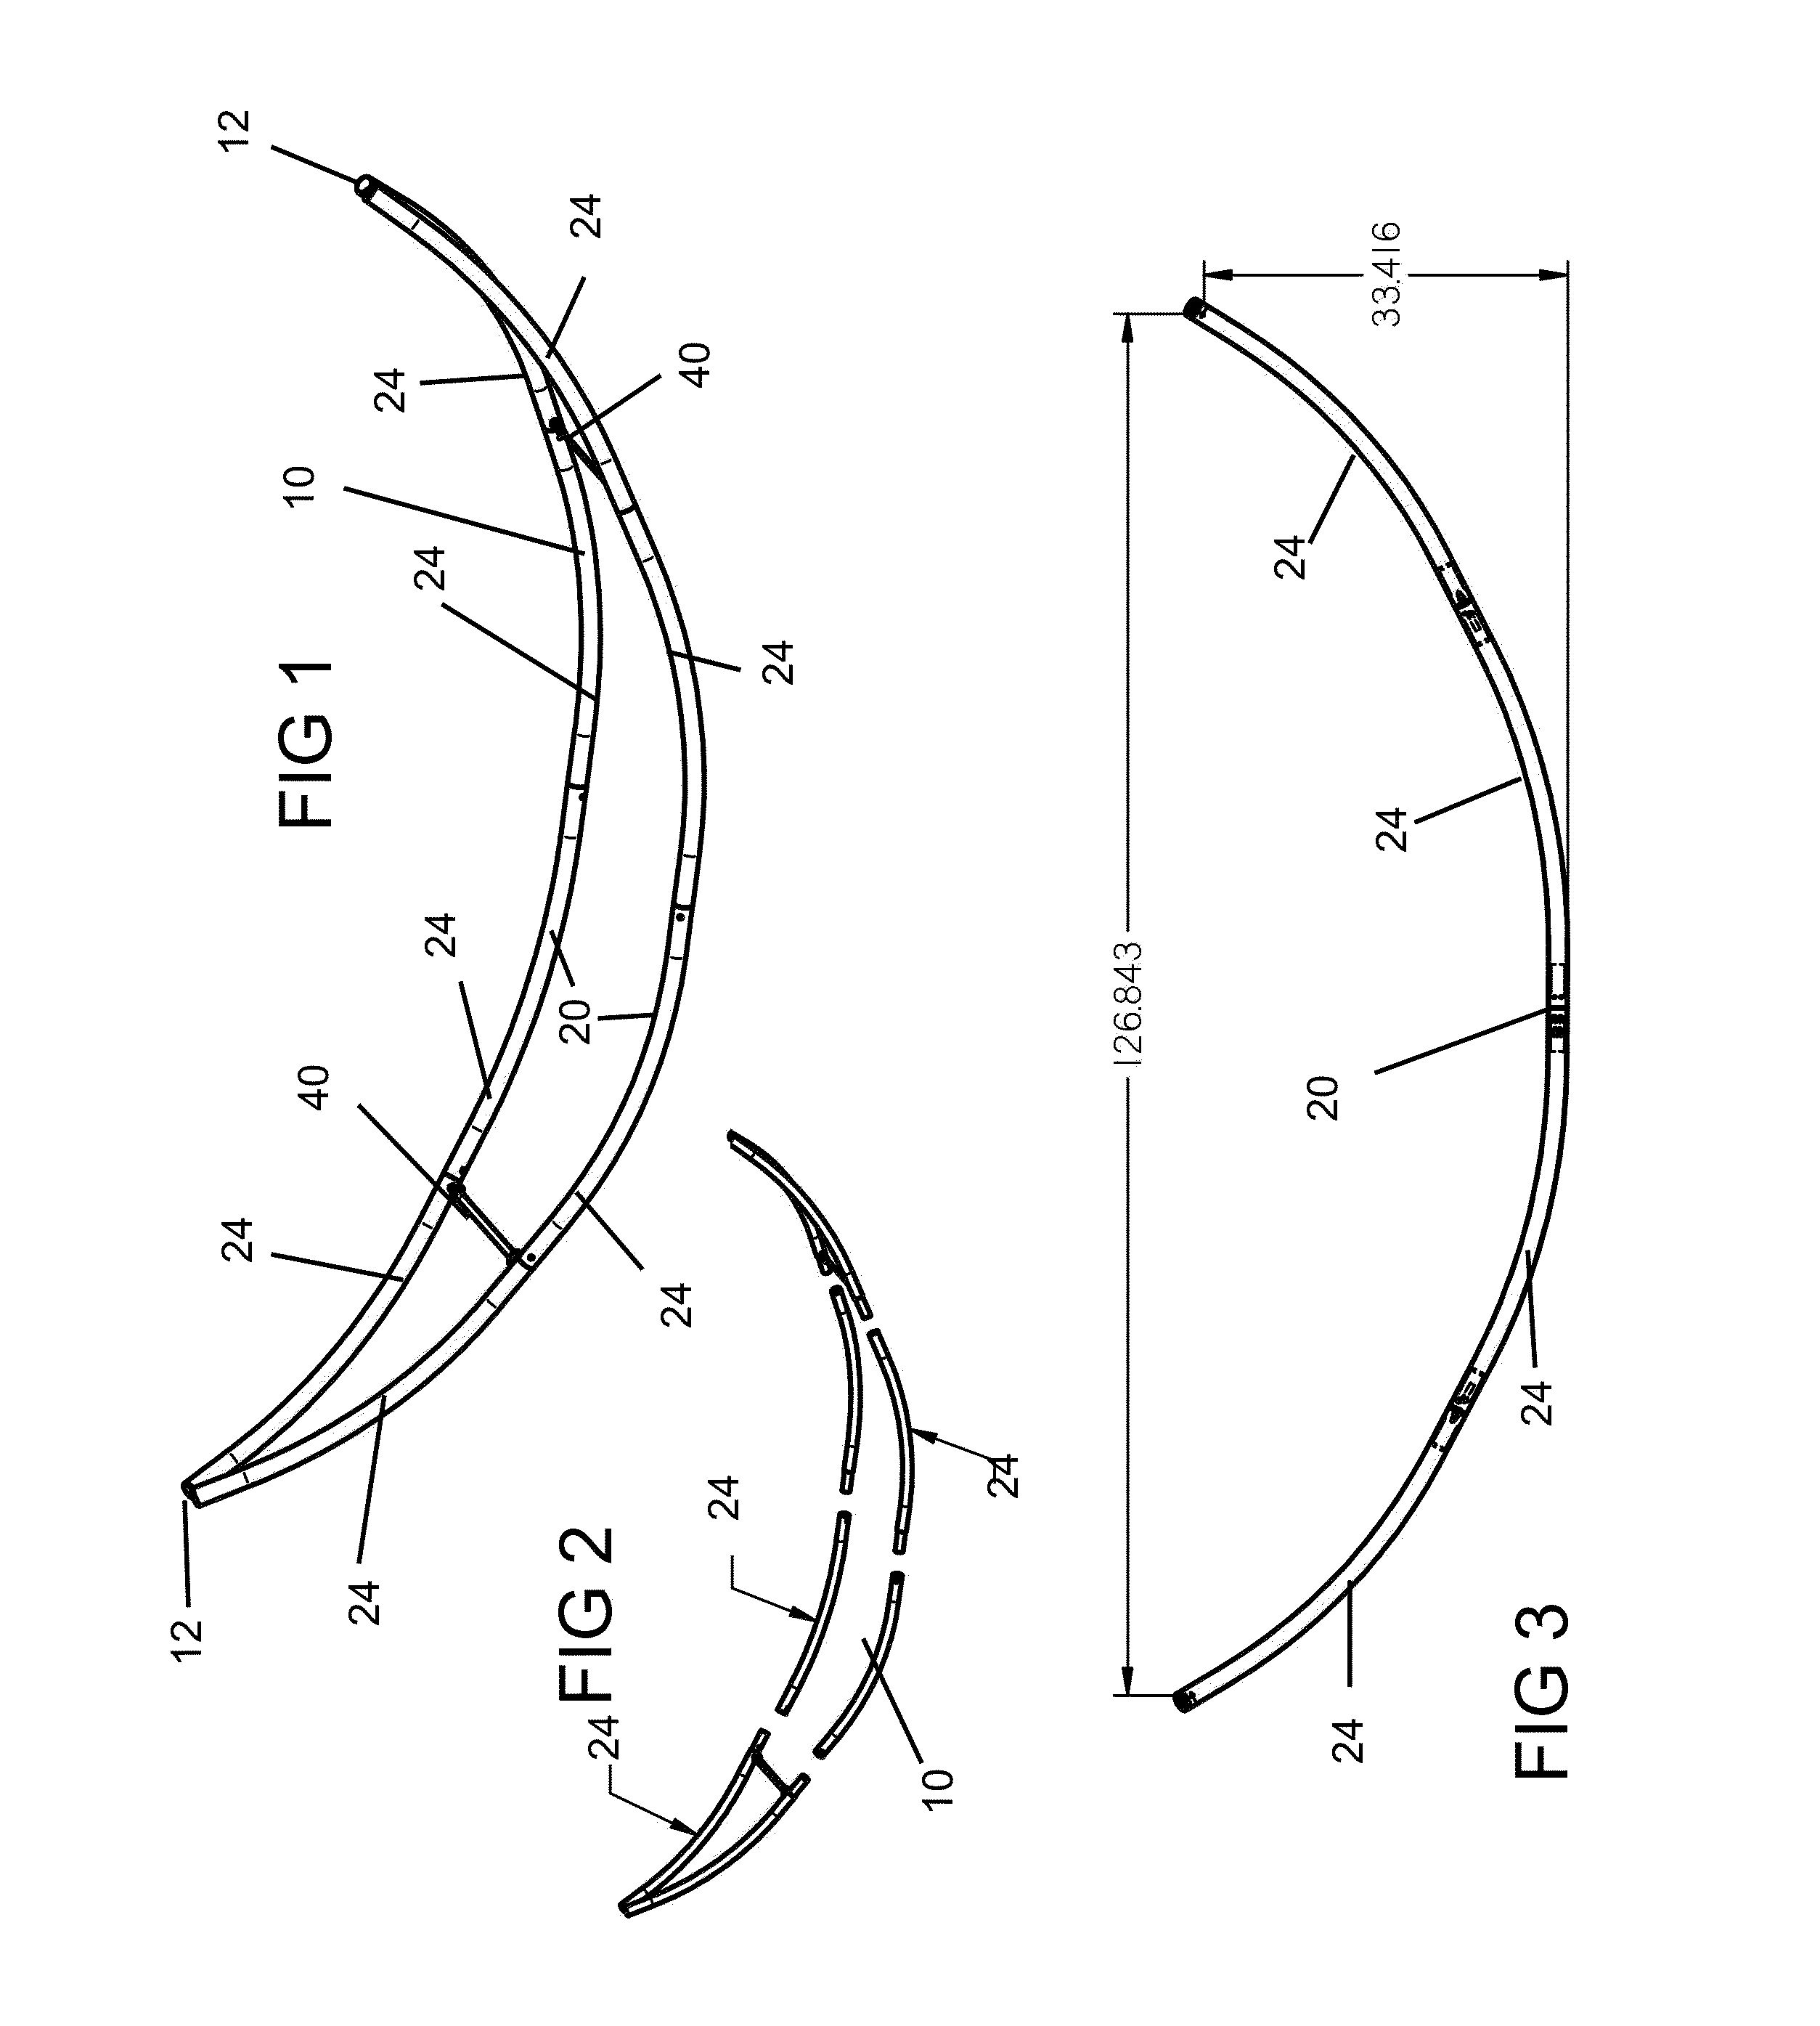 Portable Hammock Frame Shiftable Between Multiple Stable Positions